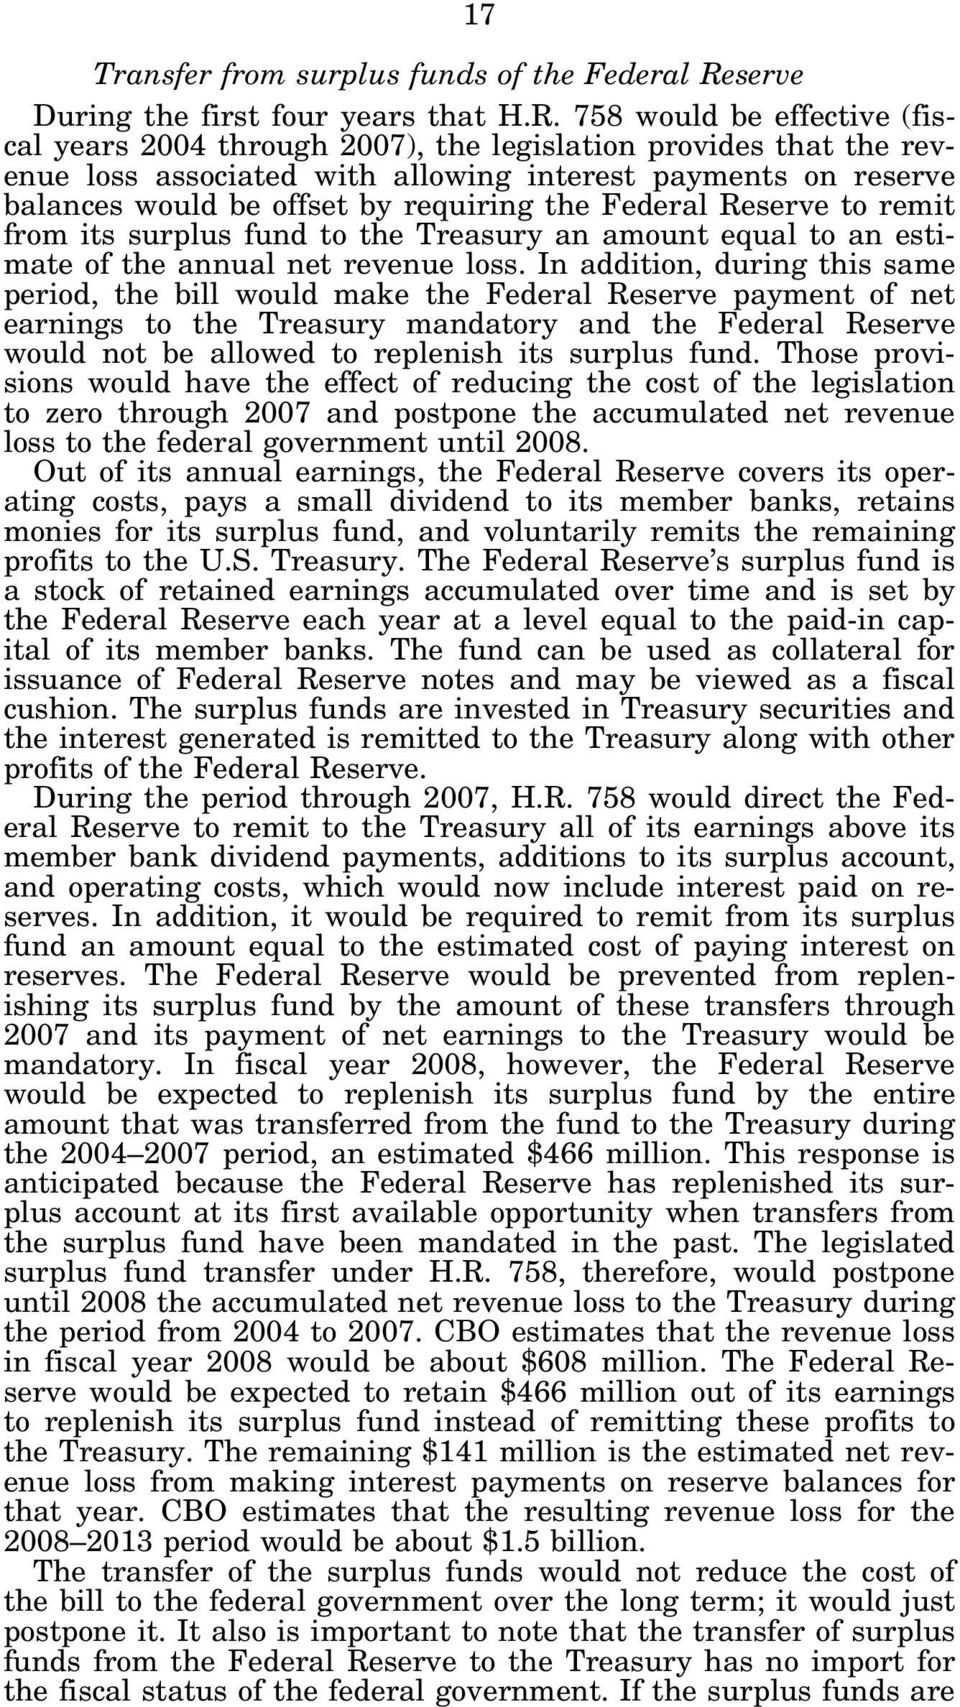 758 would be effective (fiscal years 2004 through 2007), the legislation provides that the revenue loss associated with allowing interest payments on reserve balances would be offset by requiring the